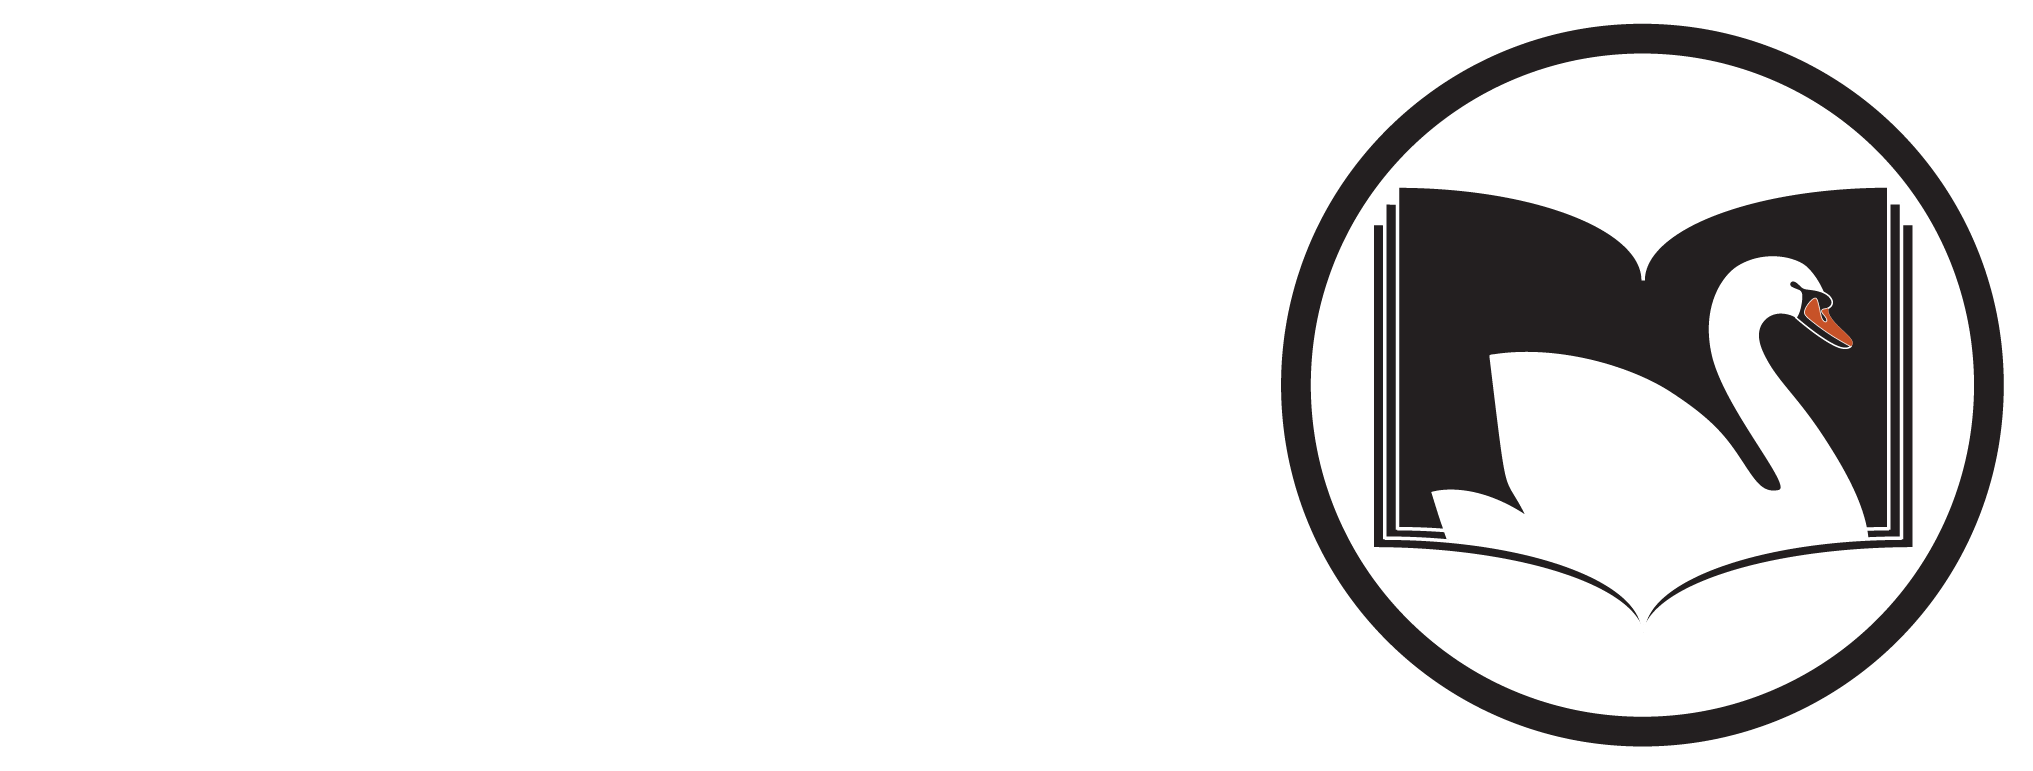 Swan Library Services Text And Logo Transparent Background - Portable Network Graphics (2216x834)